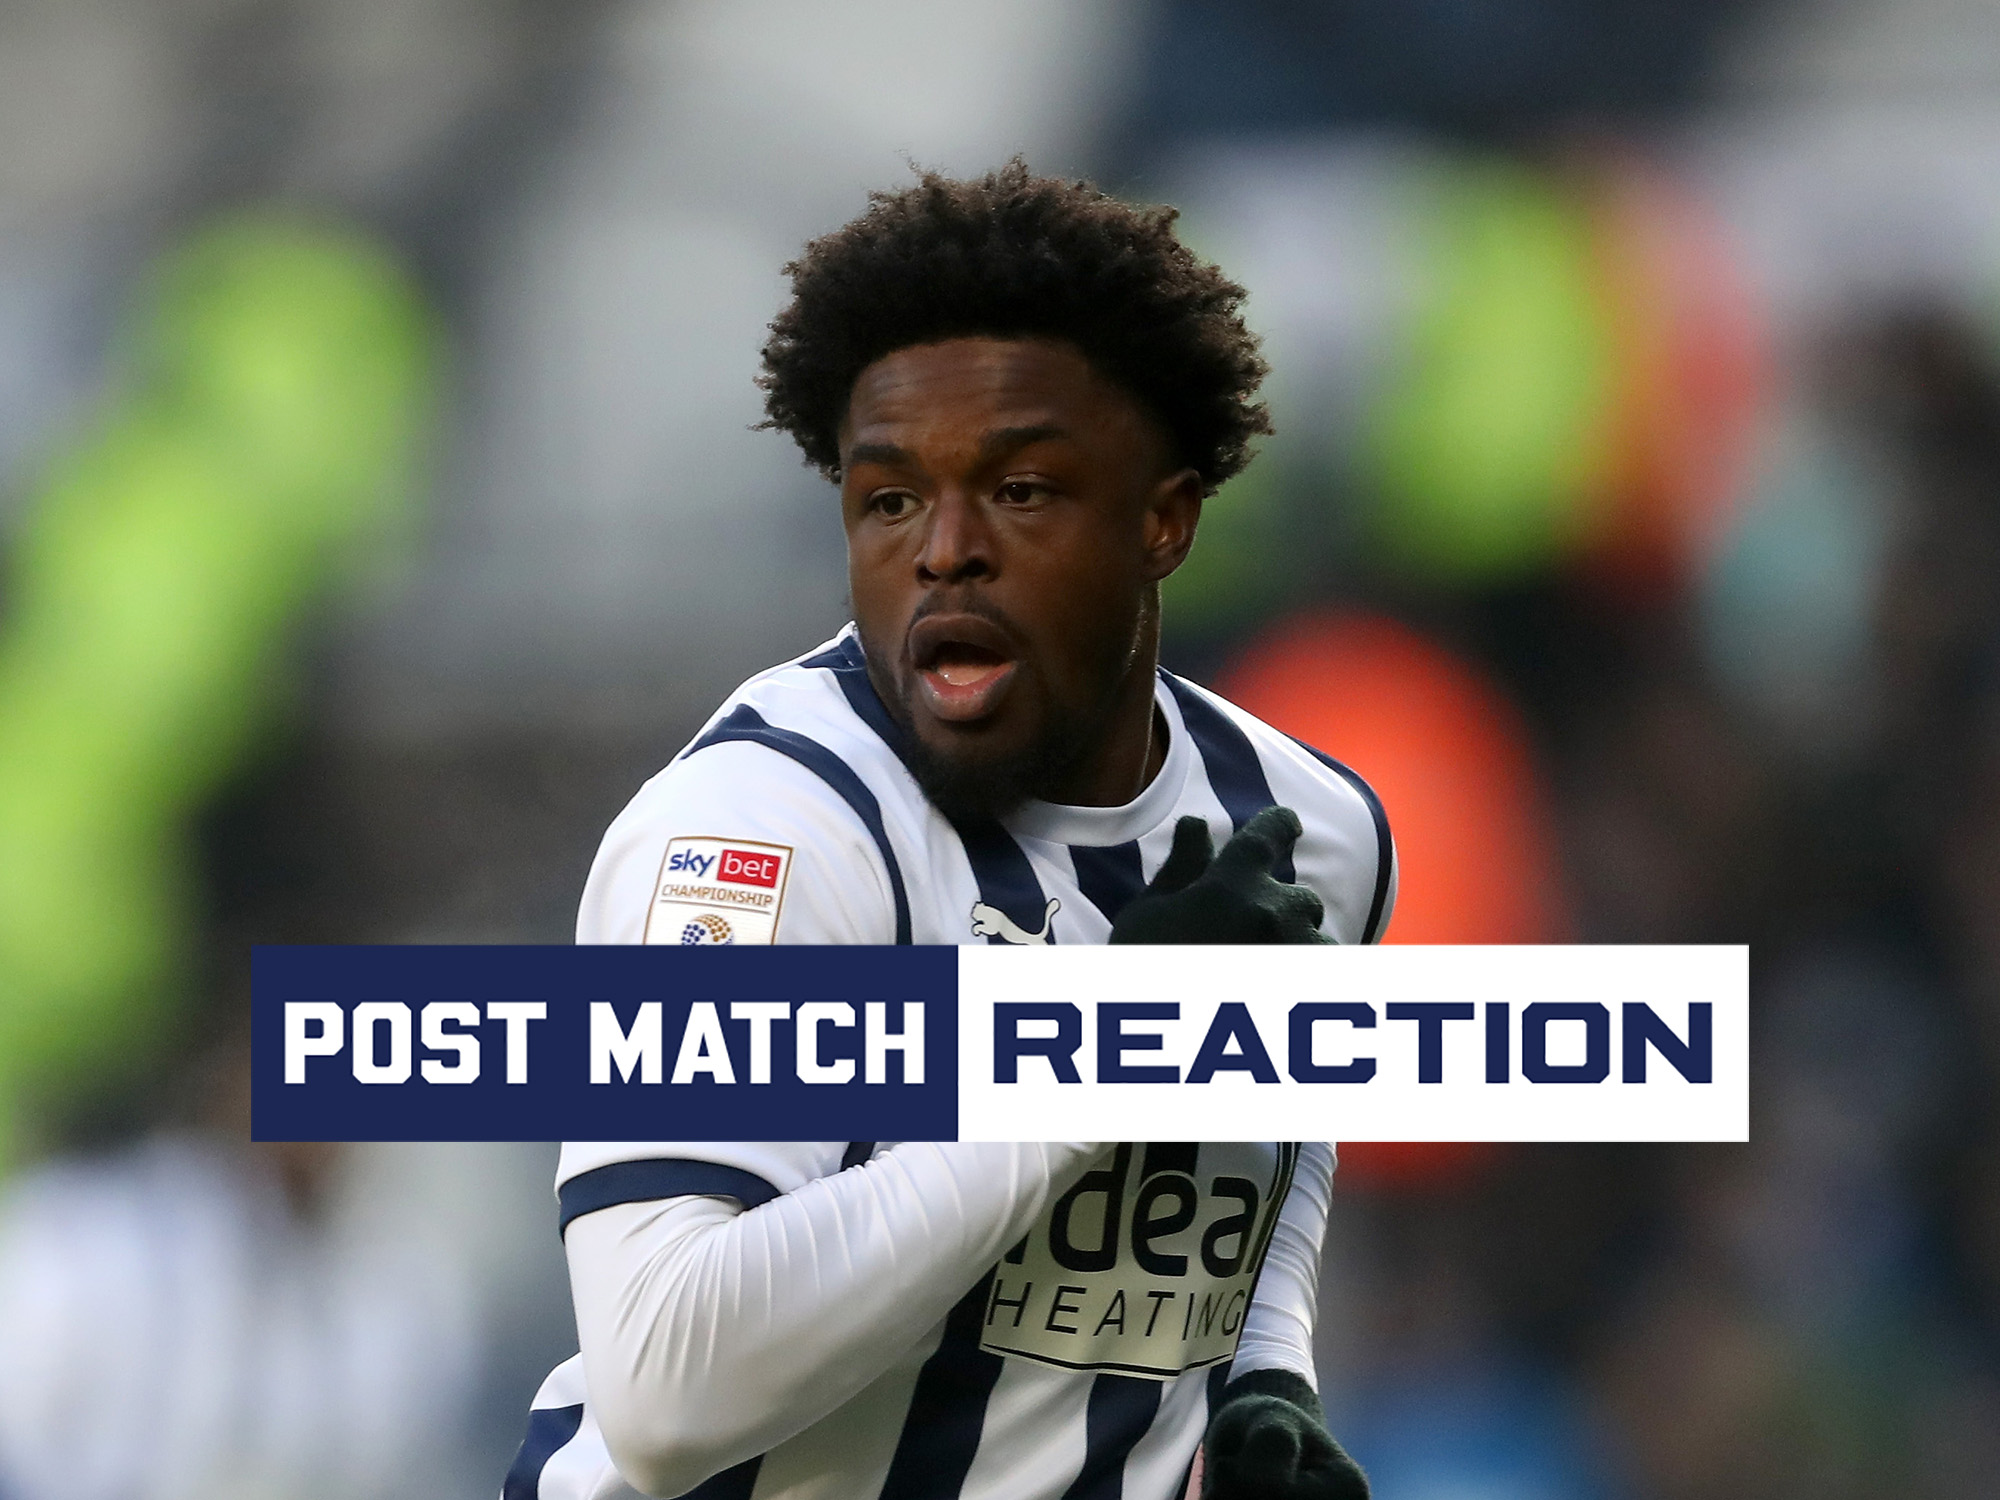 Josh Maja's post-match Leicester reaction graphic and image